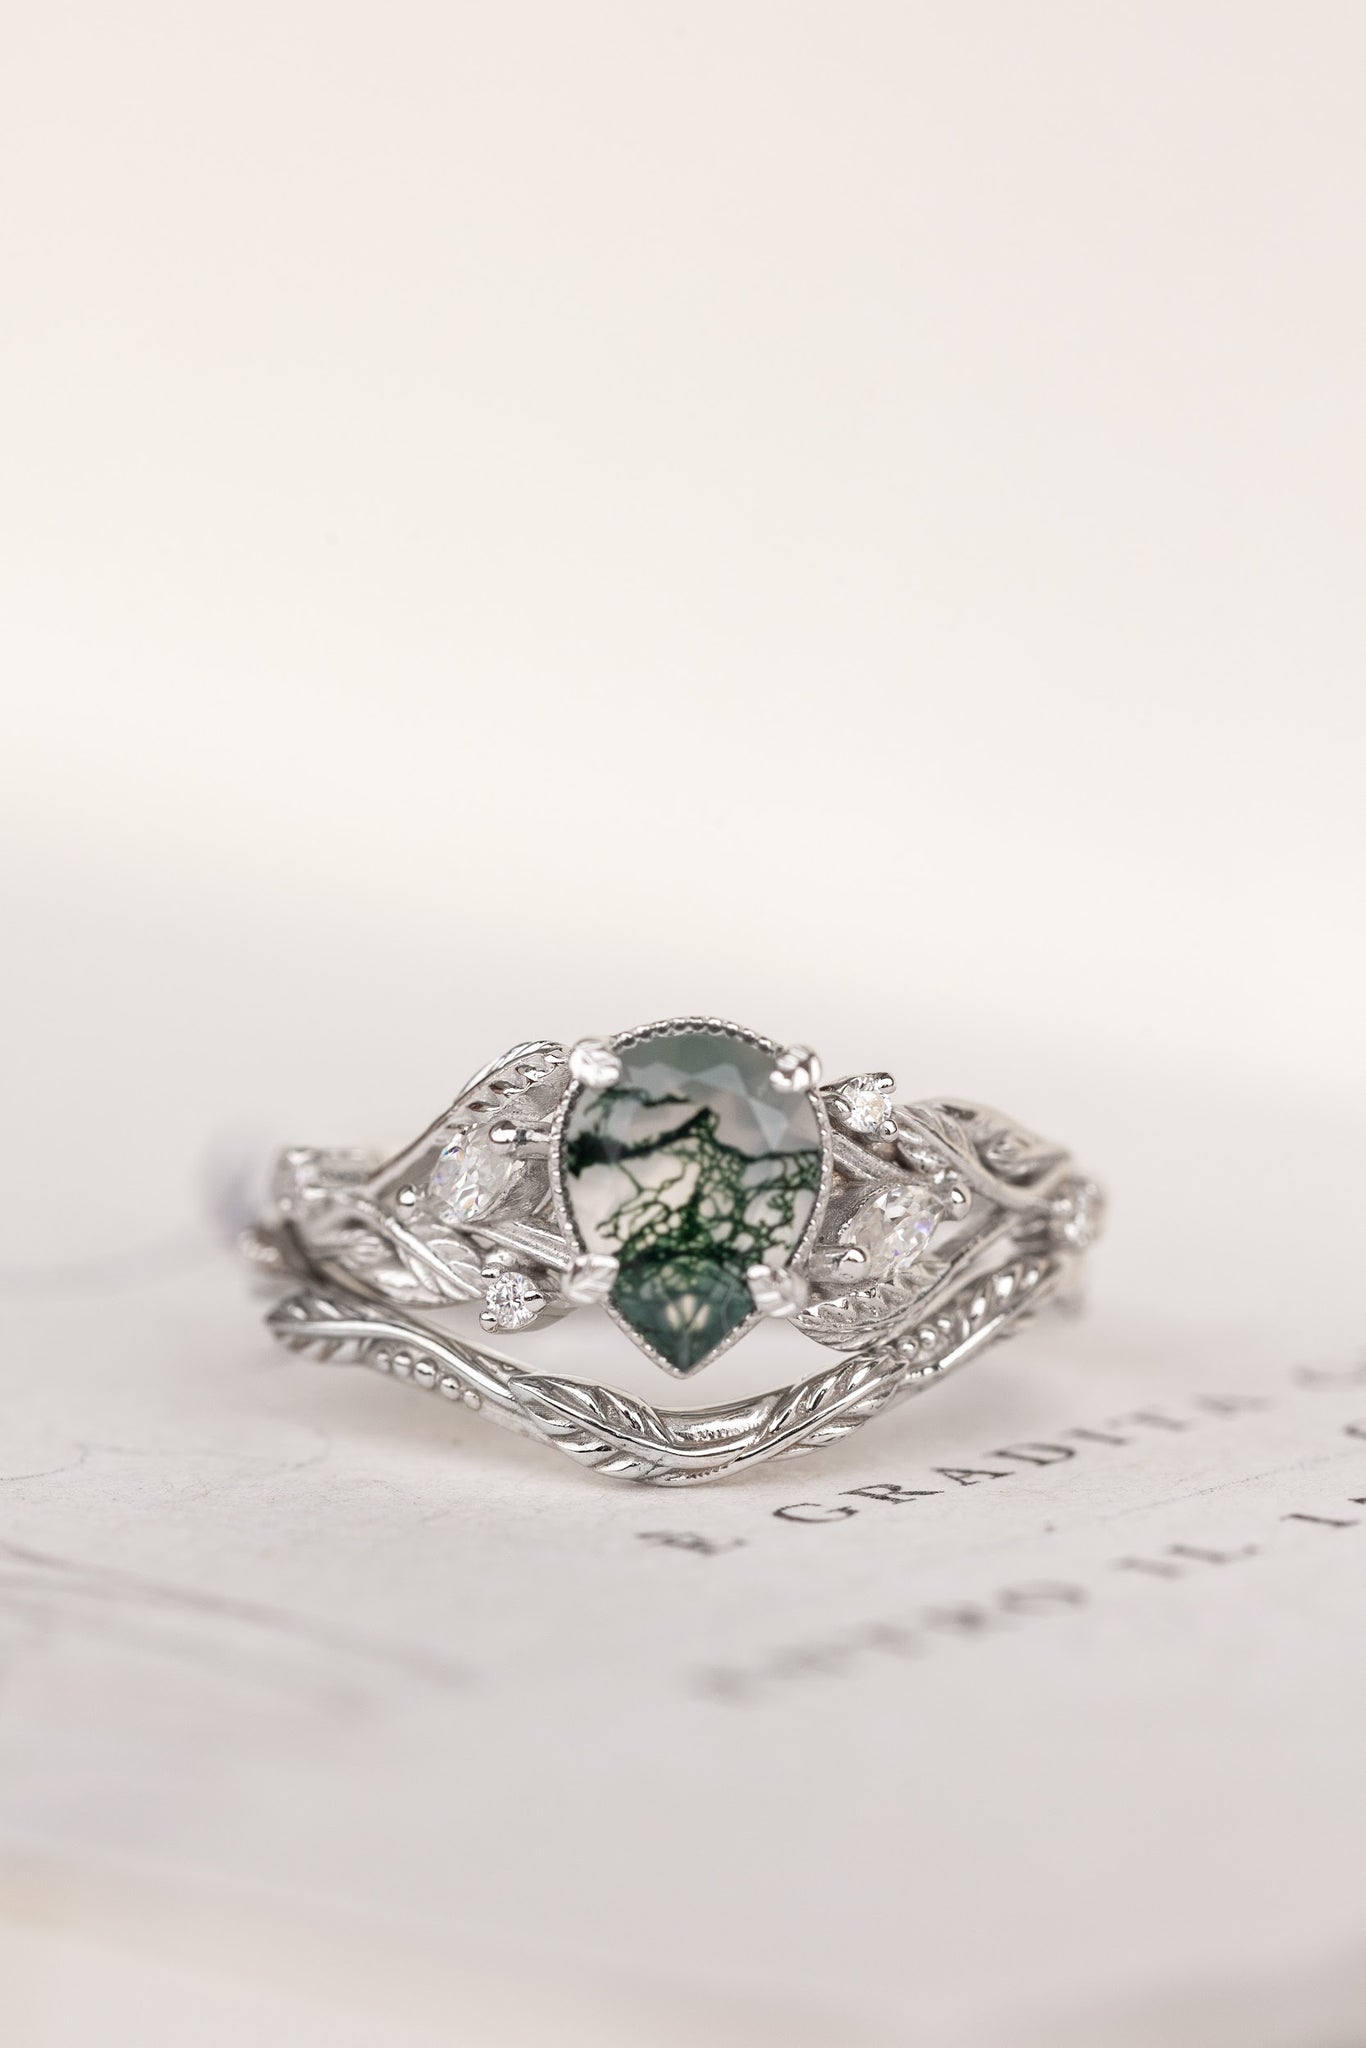 Unique moss agate engagement ring with diamonds, nature themed leaves and diamonds ring / Patricia - Eden Garden Jewelry™